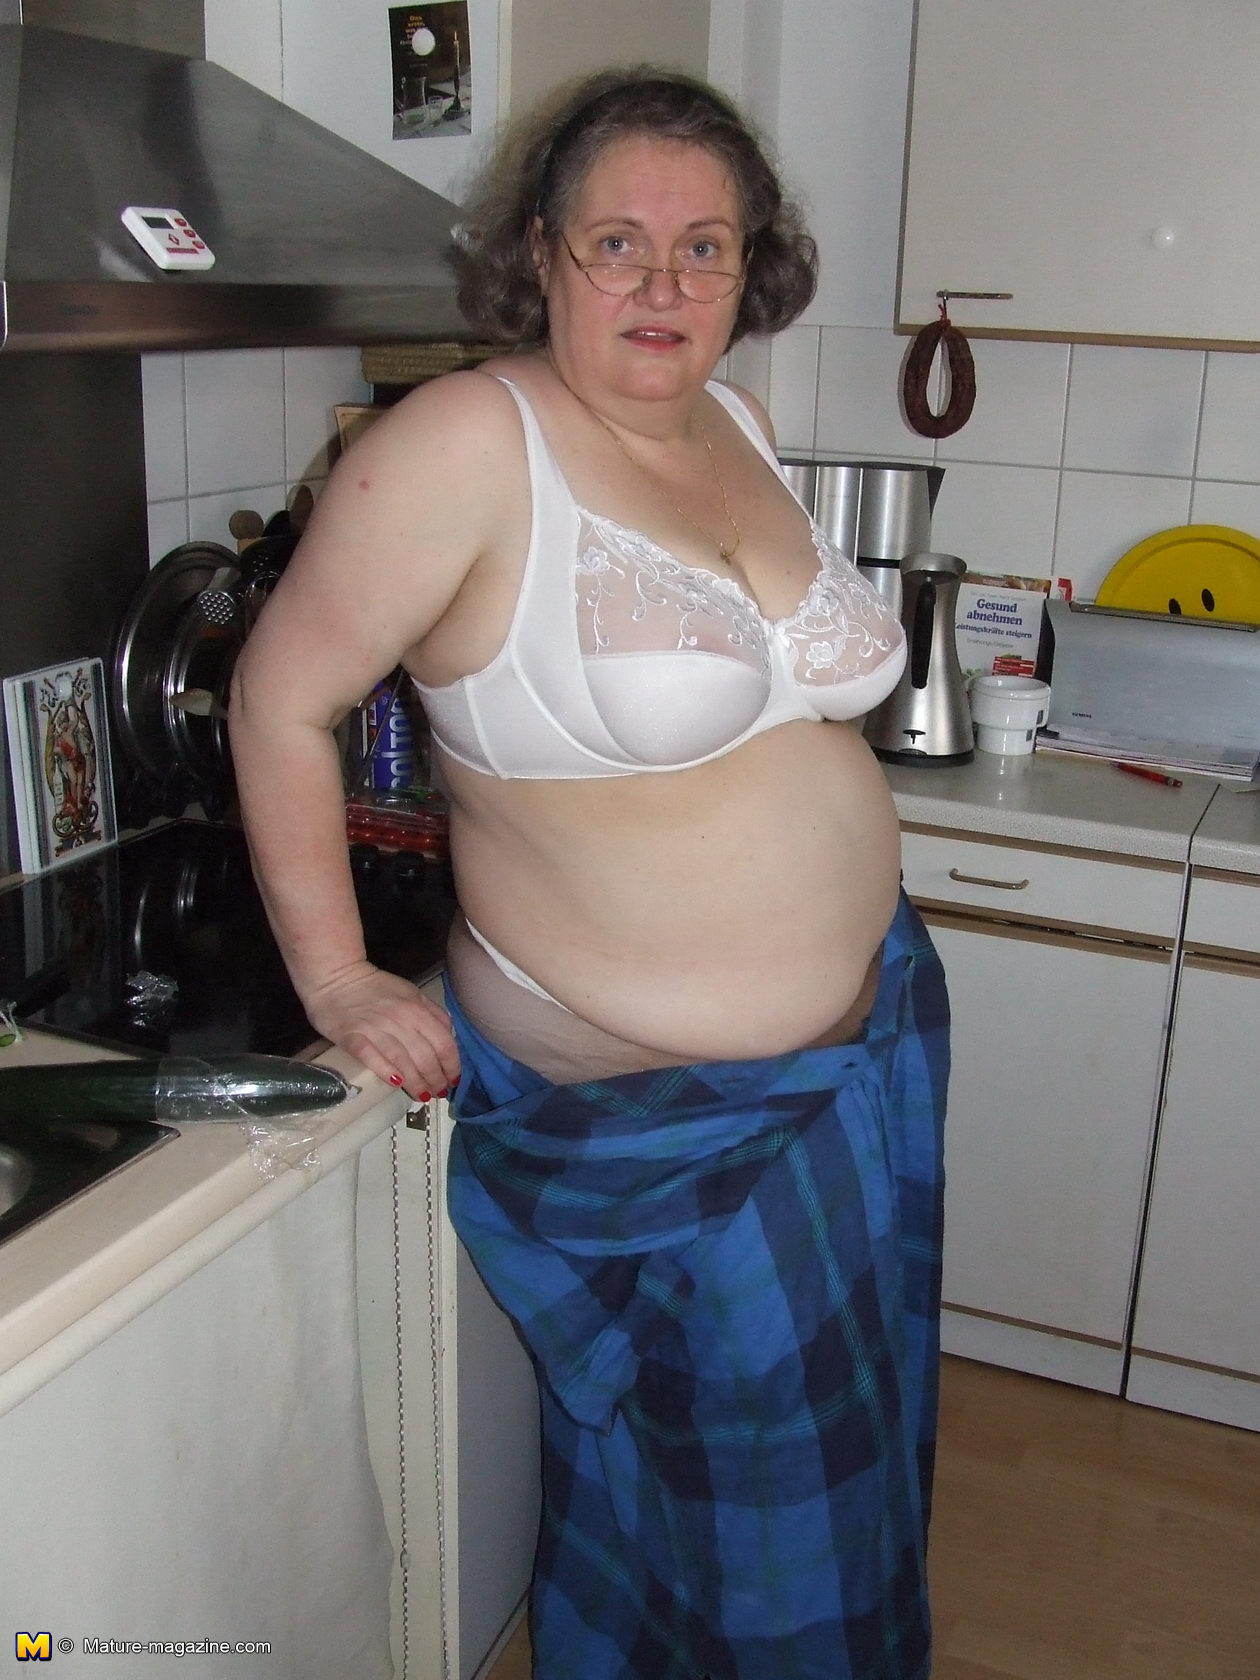 Nasty Mature Bbw Housewife - Amateur chubby housewife getting nasty in the kitchen